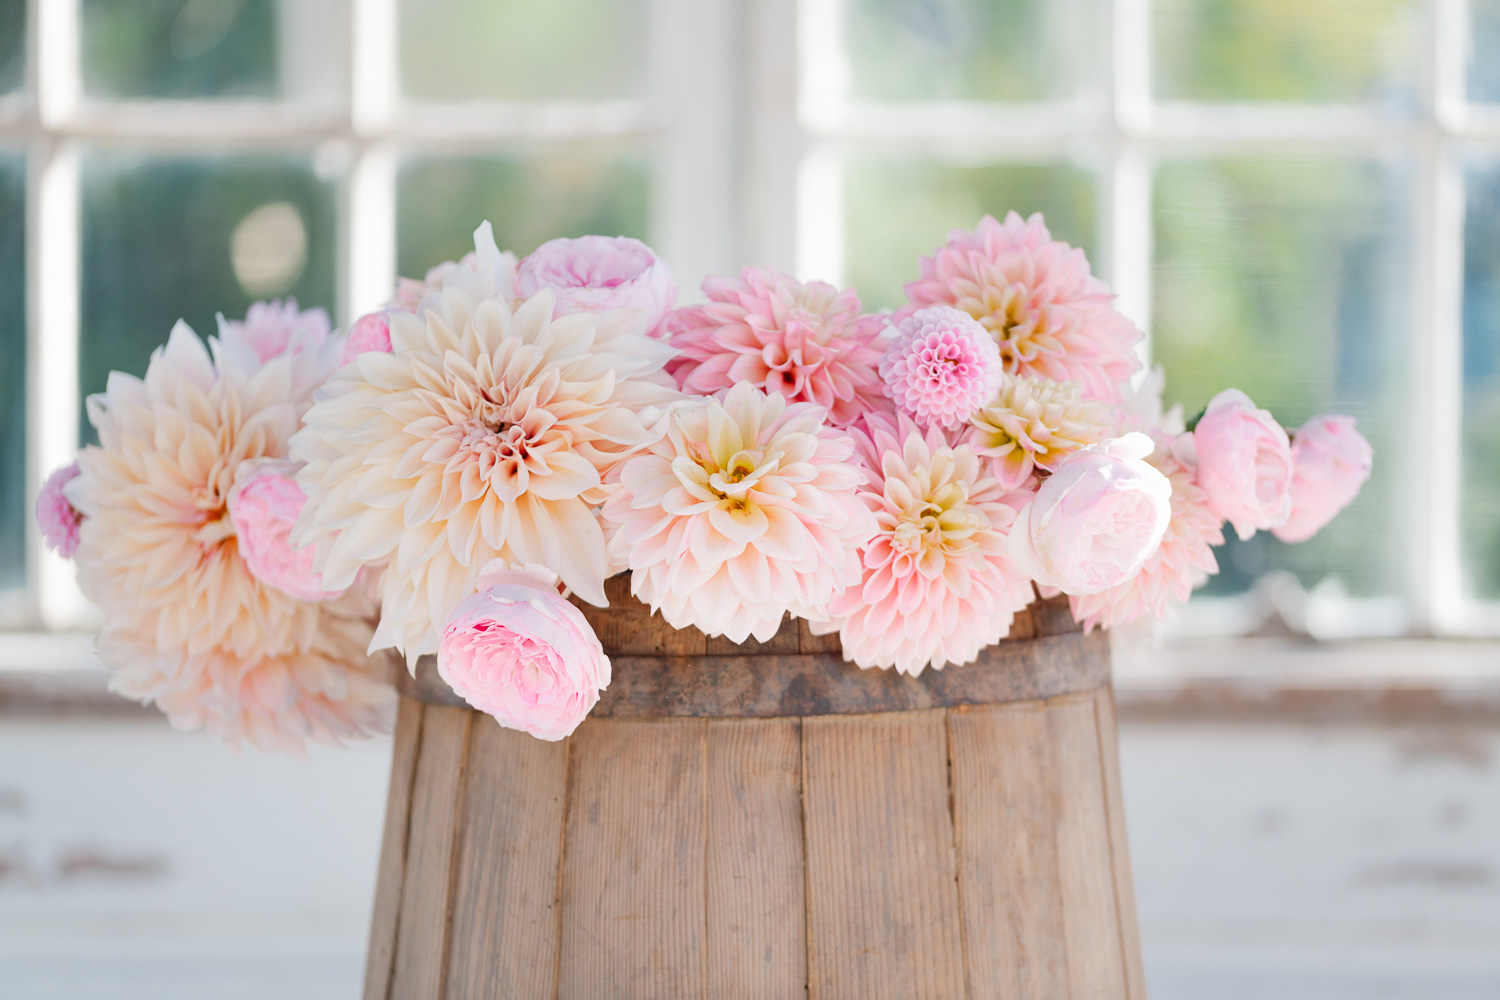 vintage wooden bucket filled with dahlias from the flower garden